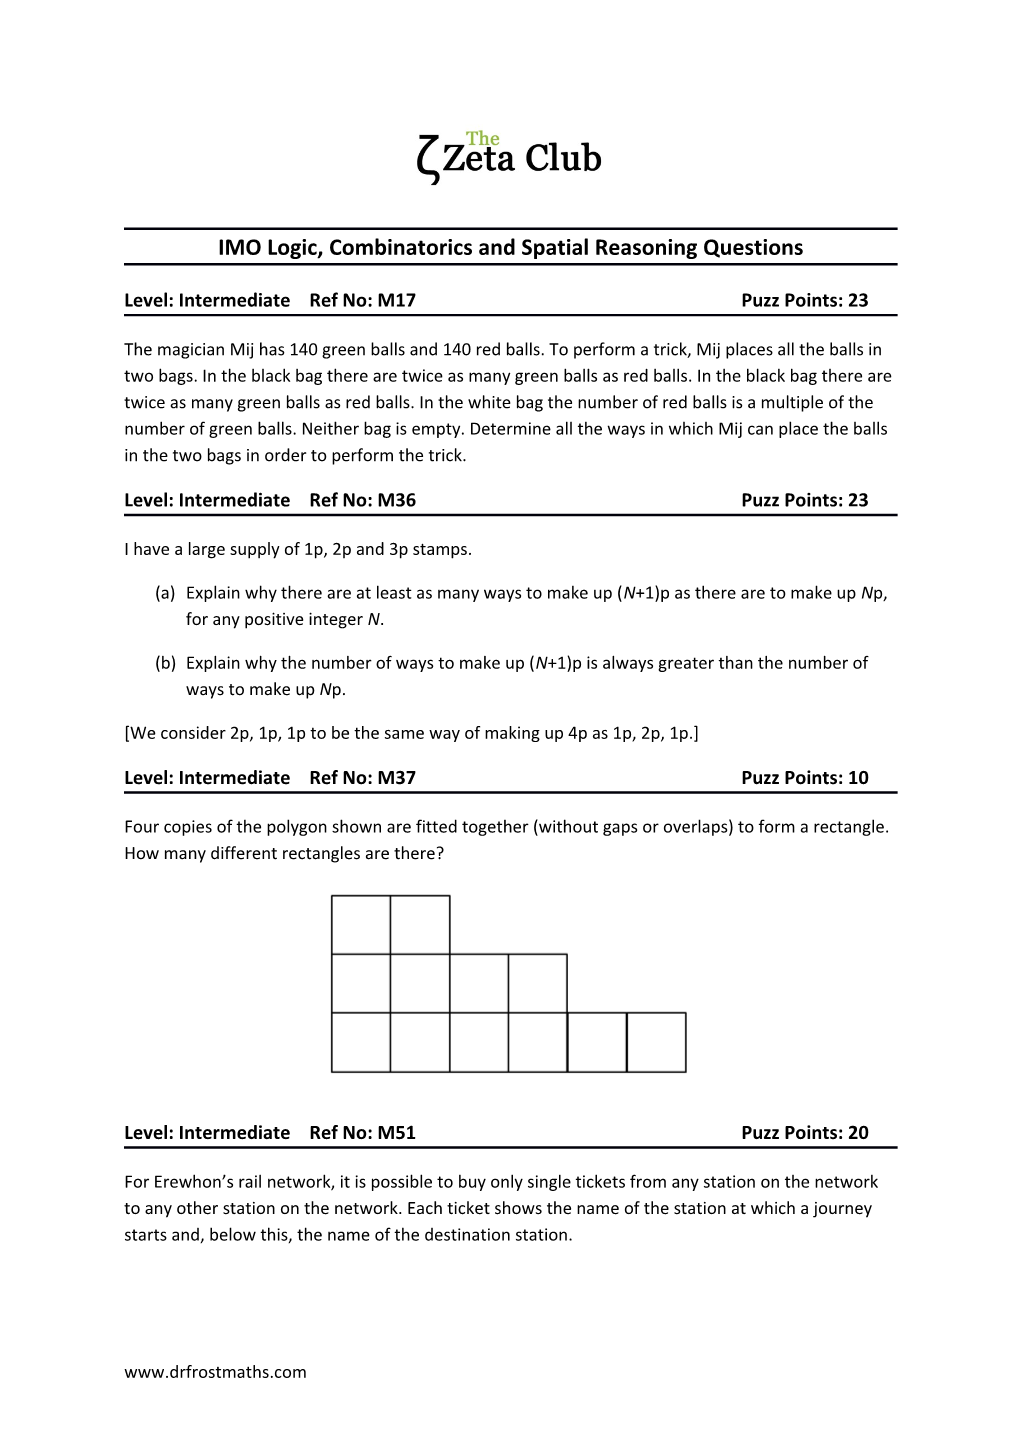 IMO Logic, Combinatorics and Spatial Reasoning Questions